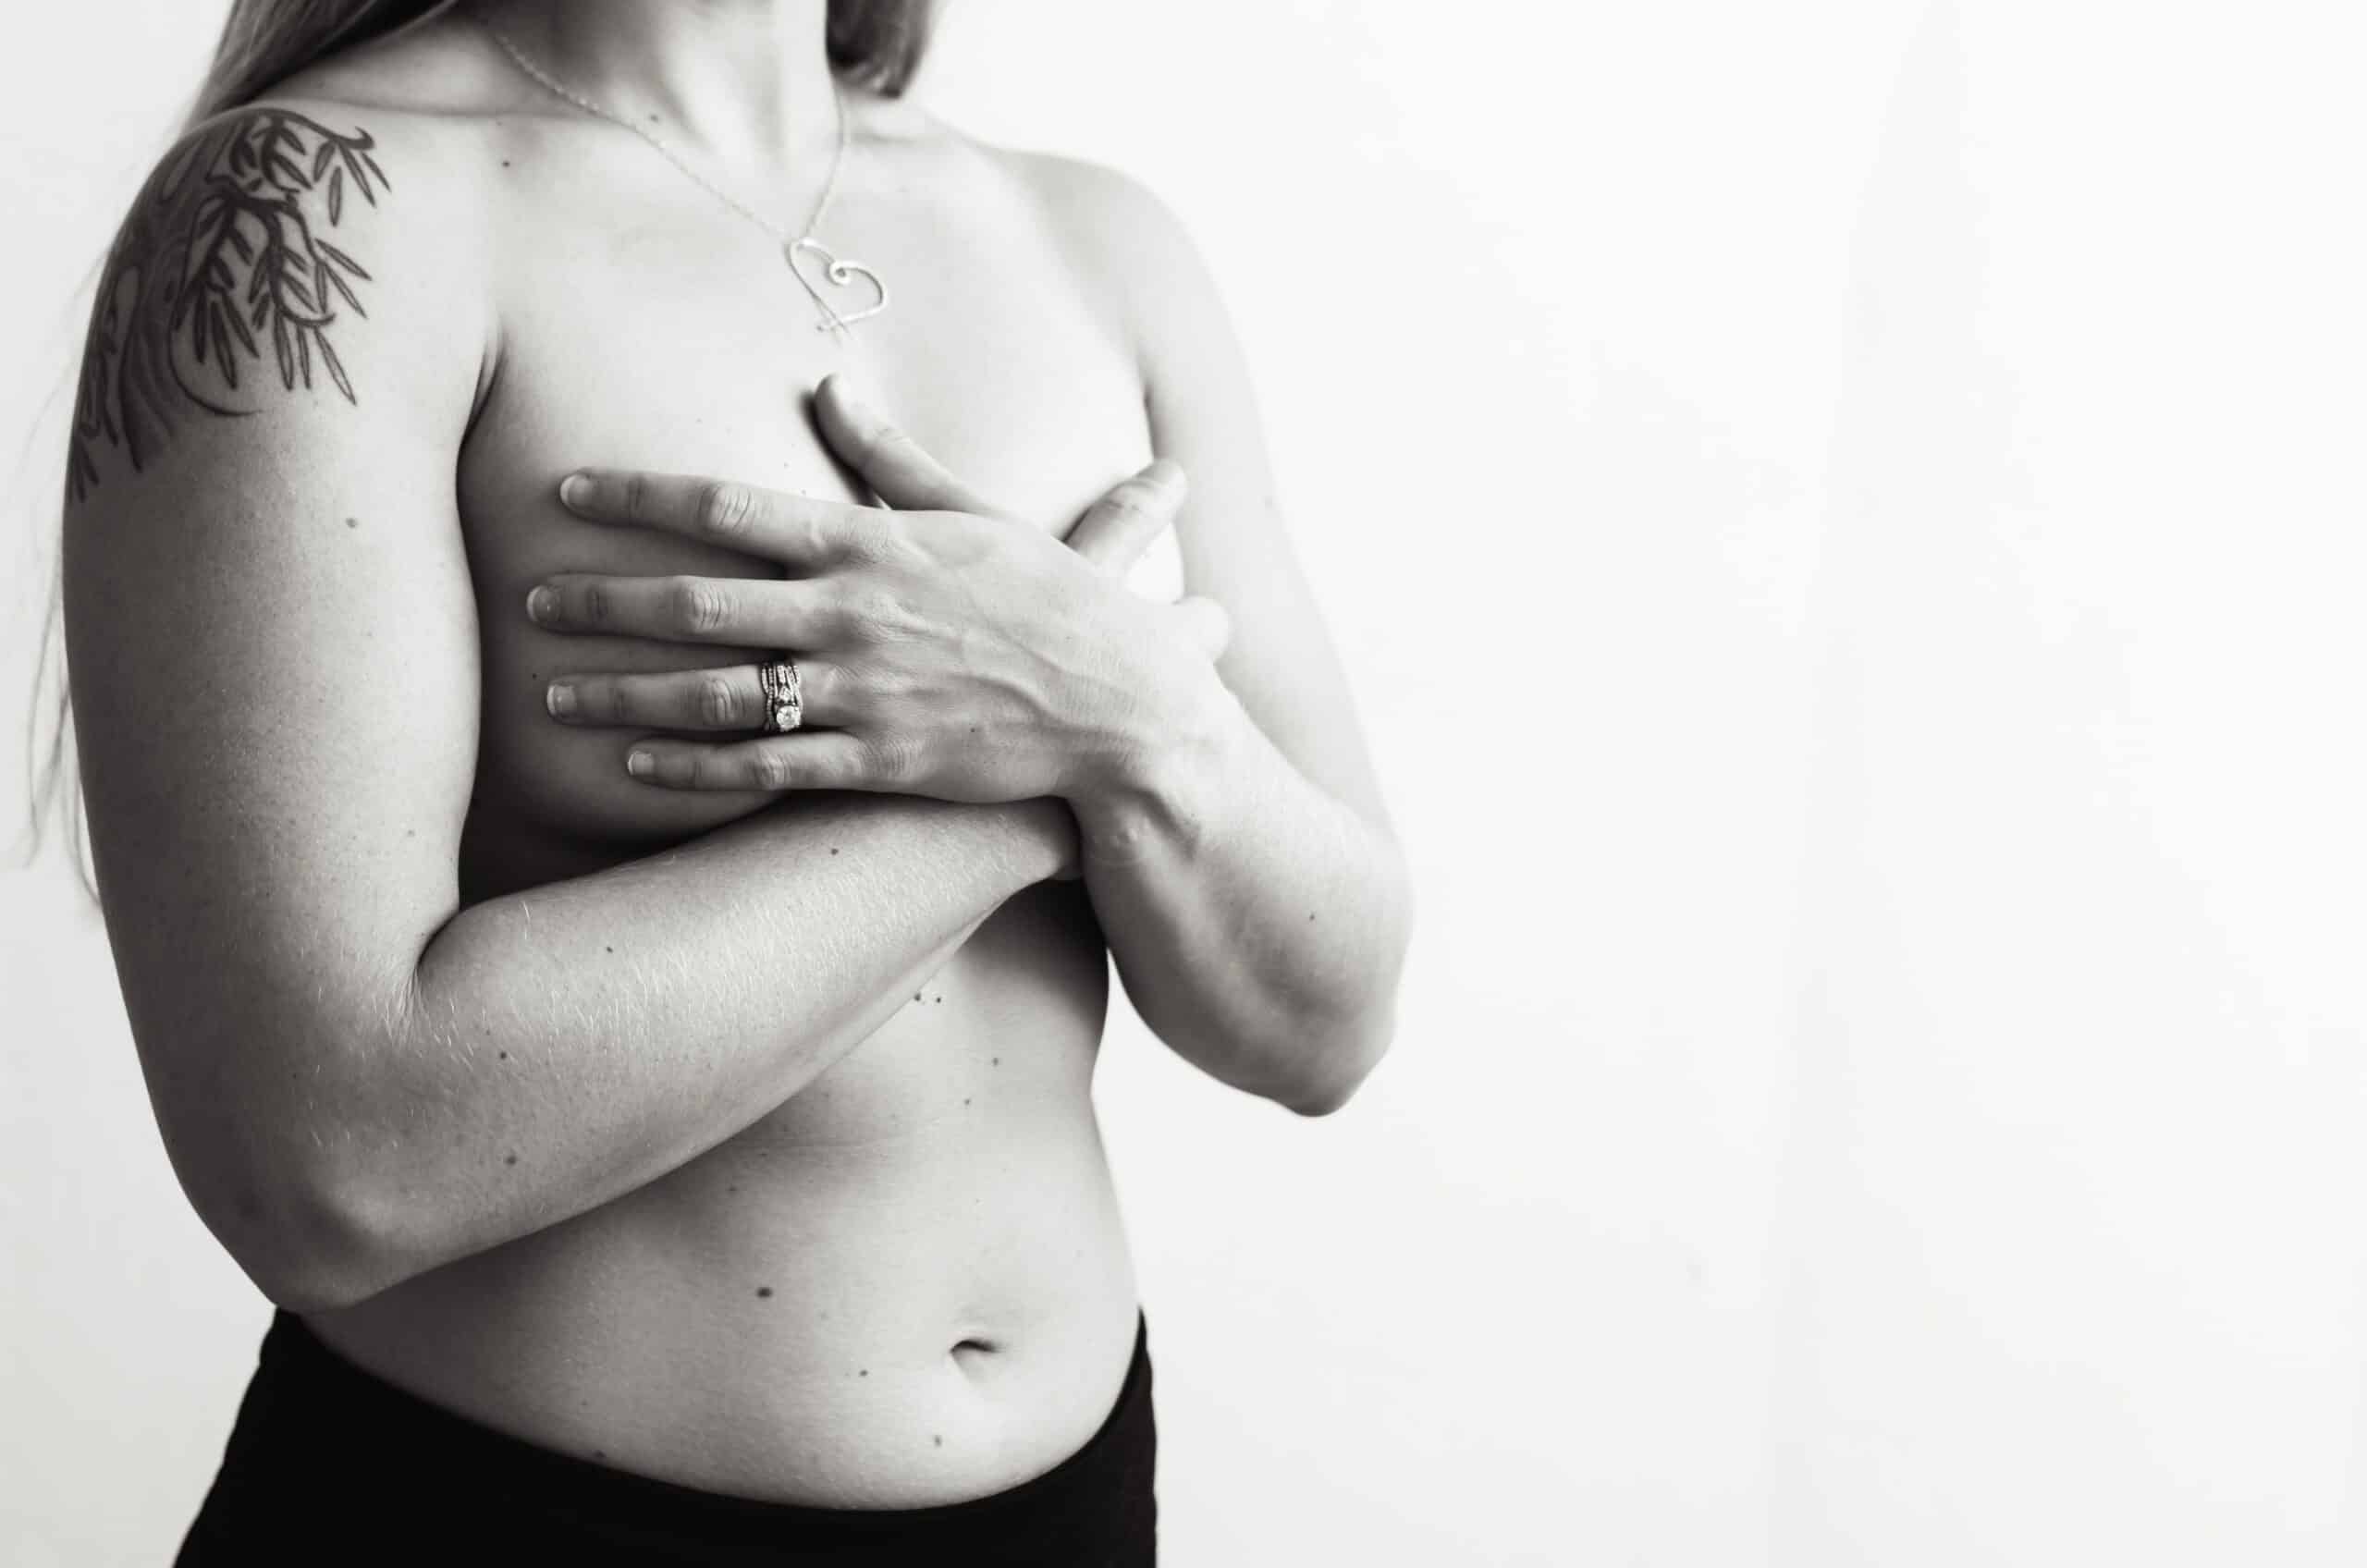 A black and white image of a woman crossing her hands over her breasts.